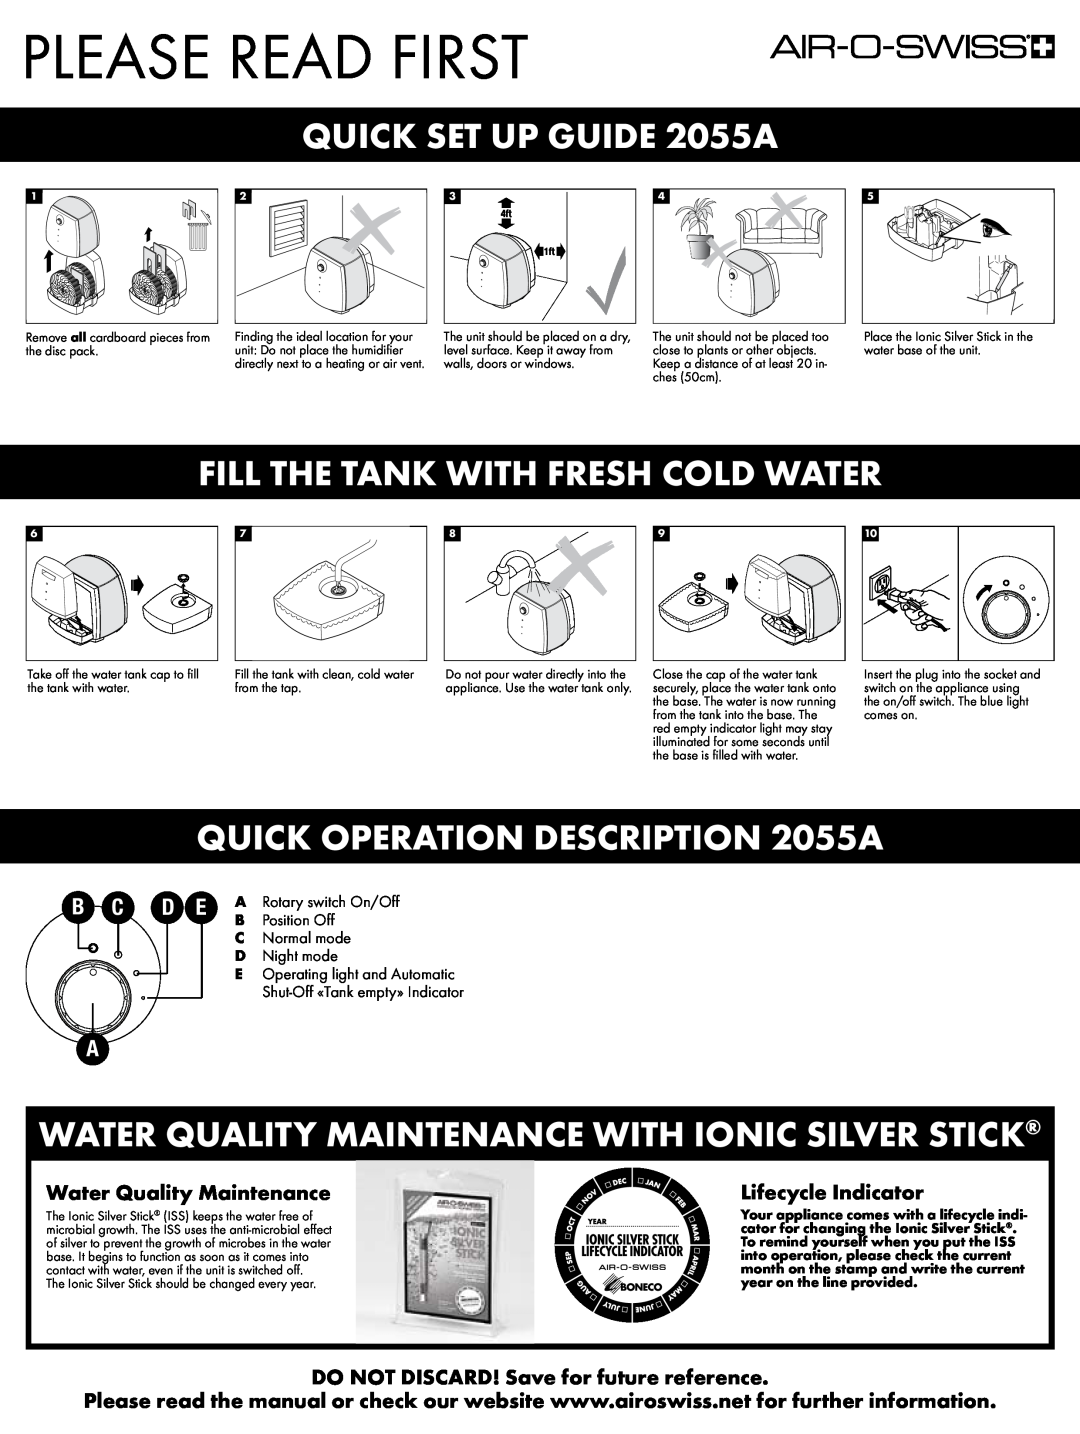 Air-O-Swiss setup guide Please Read First, QUICK SET UP GUIDE 2055A, Fill The Tank With Fresh Cold Water, Position Off 